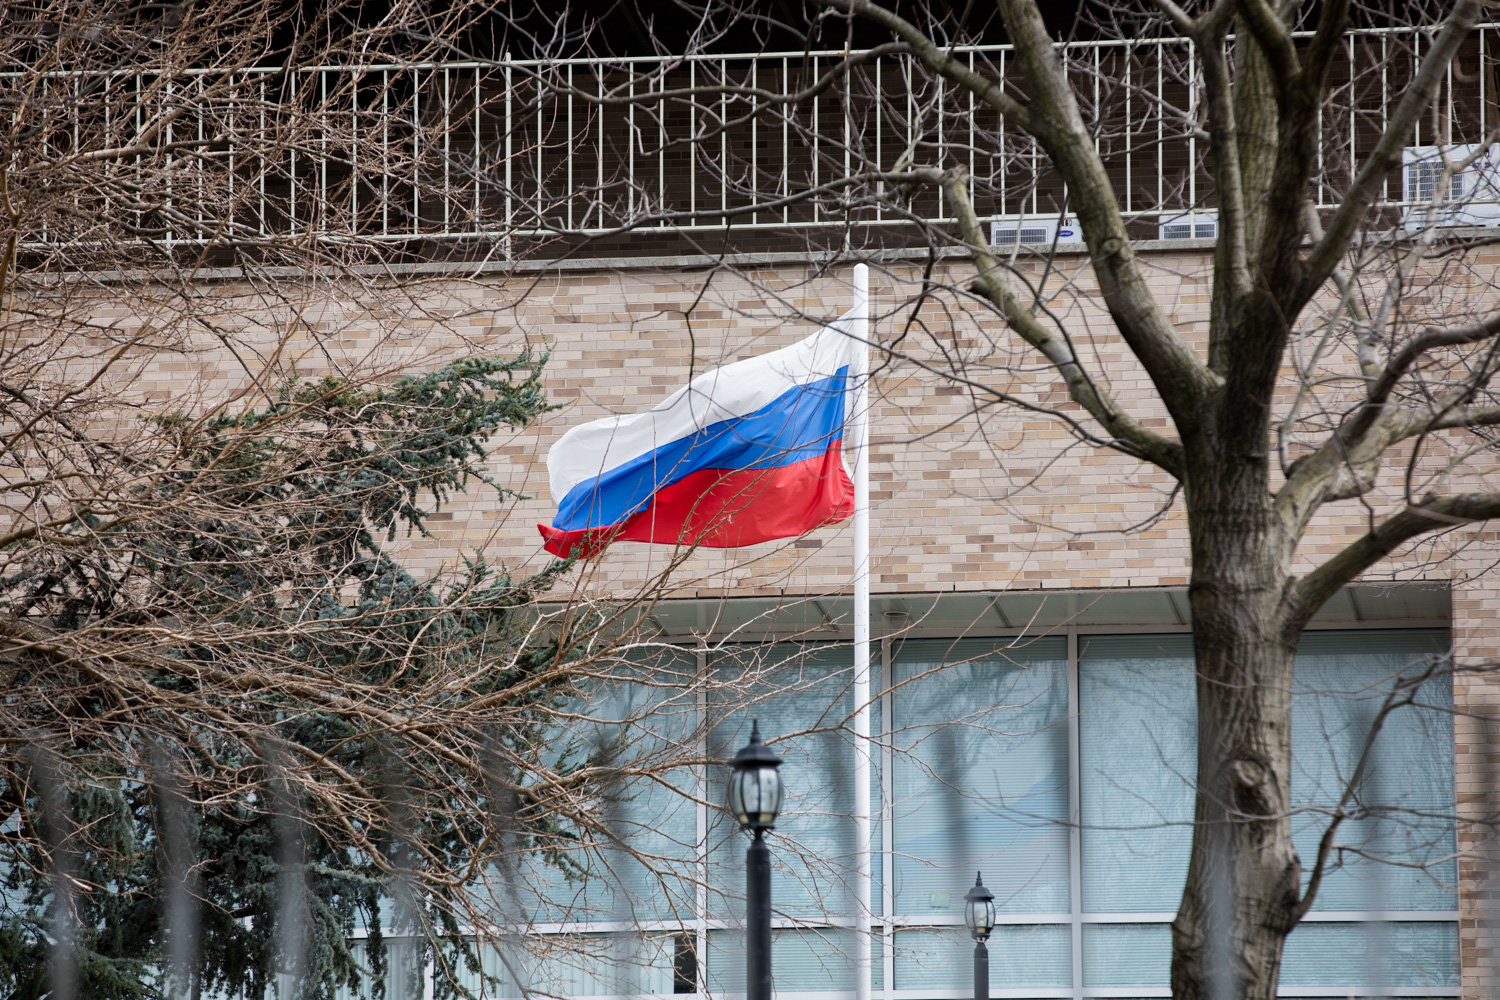 The Russian flag waves in the wind in front of the Russian Mission on Mosholu Avenue.